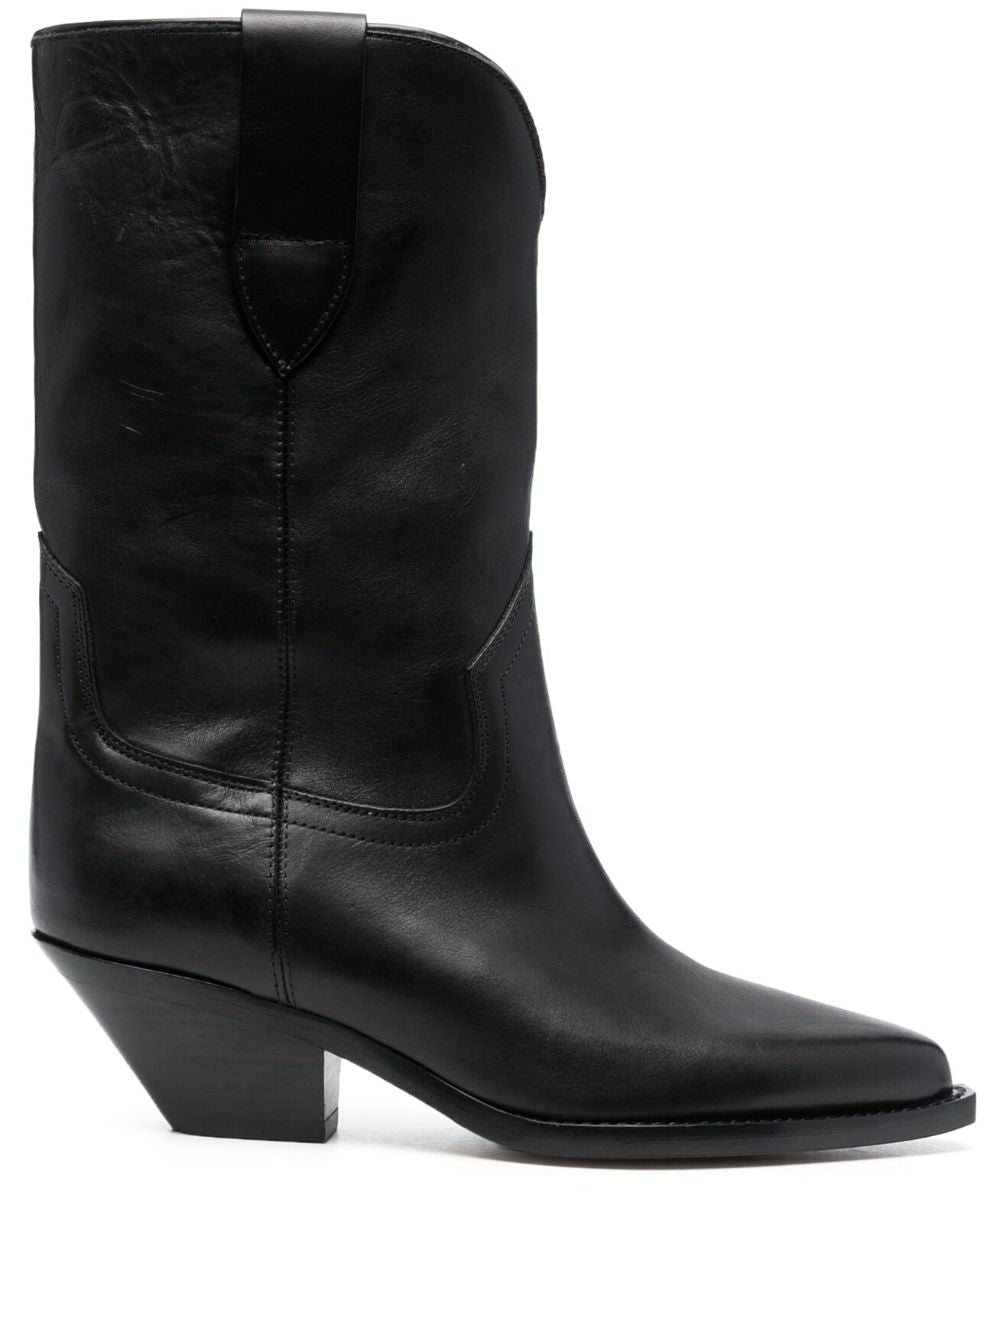 Black Leather Mid Heel Boots for Women by Isabel Marant